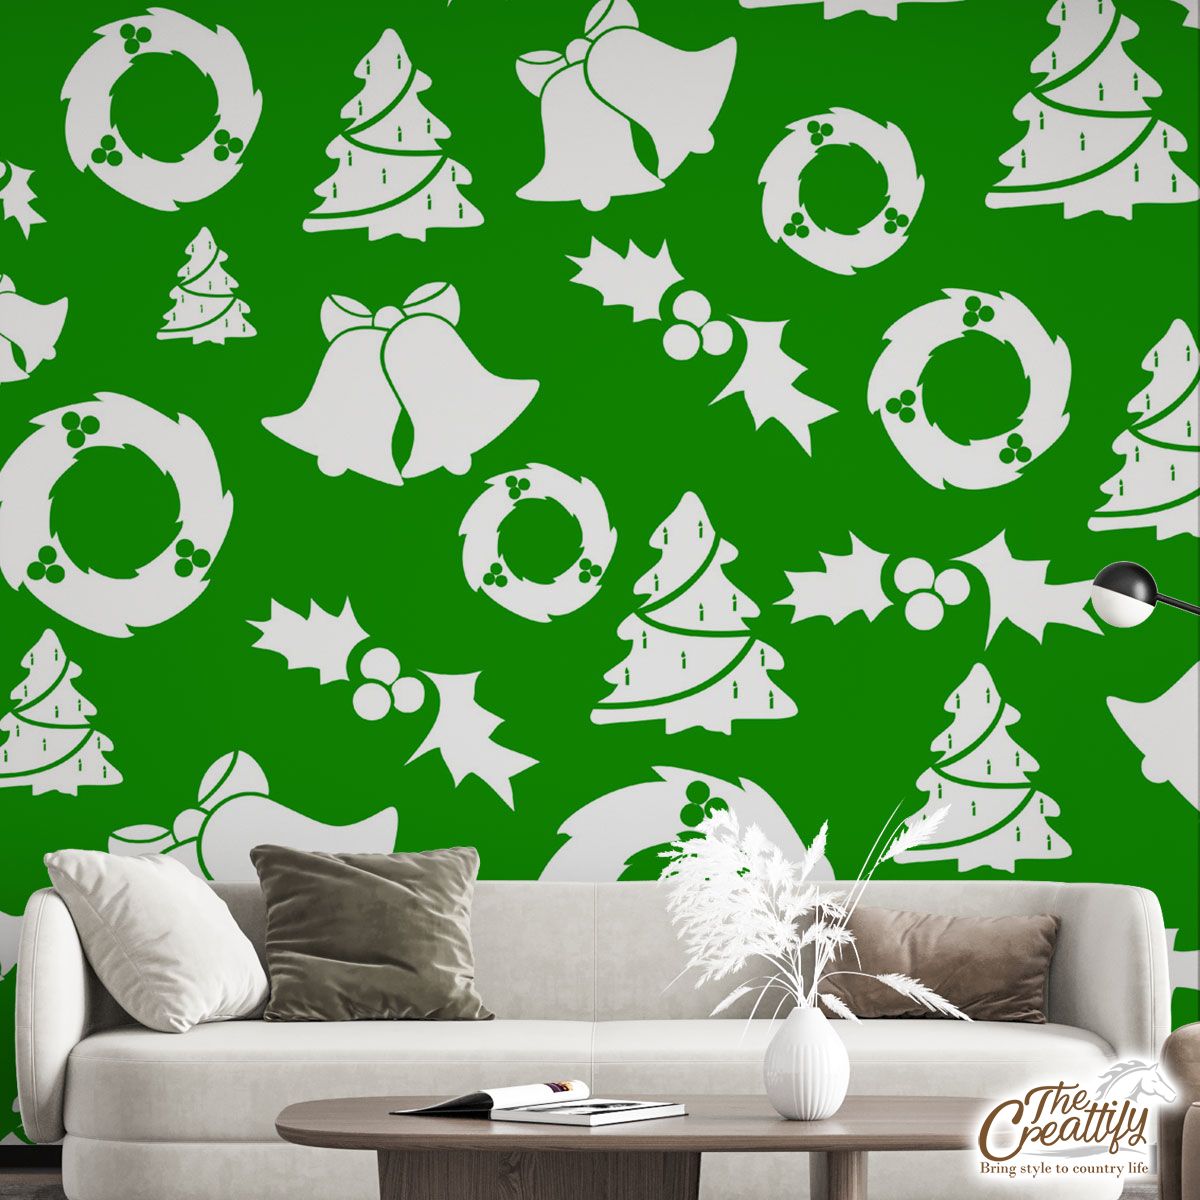 Christmas Wreath, Holly Leaf, Pine Tree And Bells On Green Wall Mural